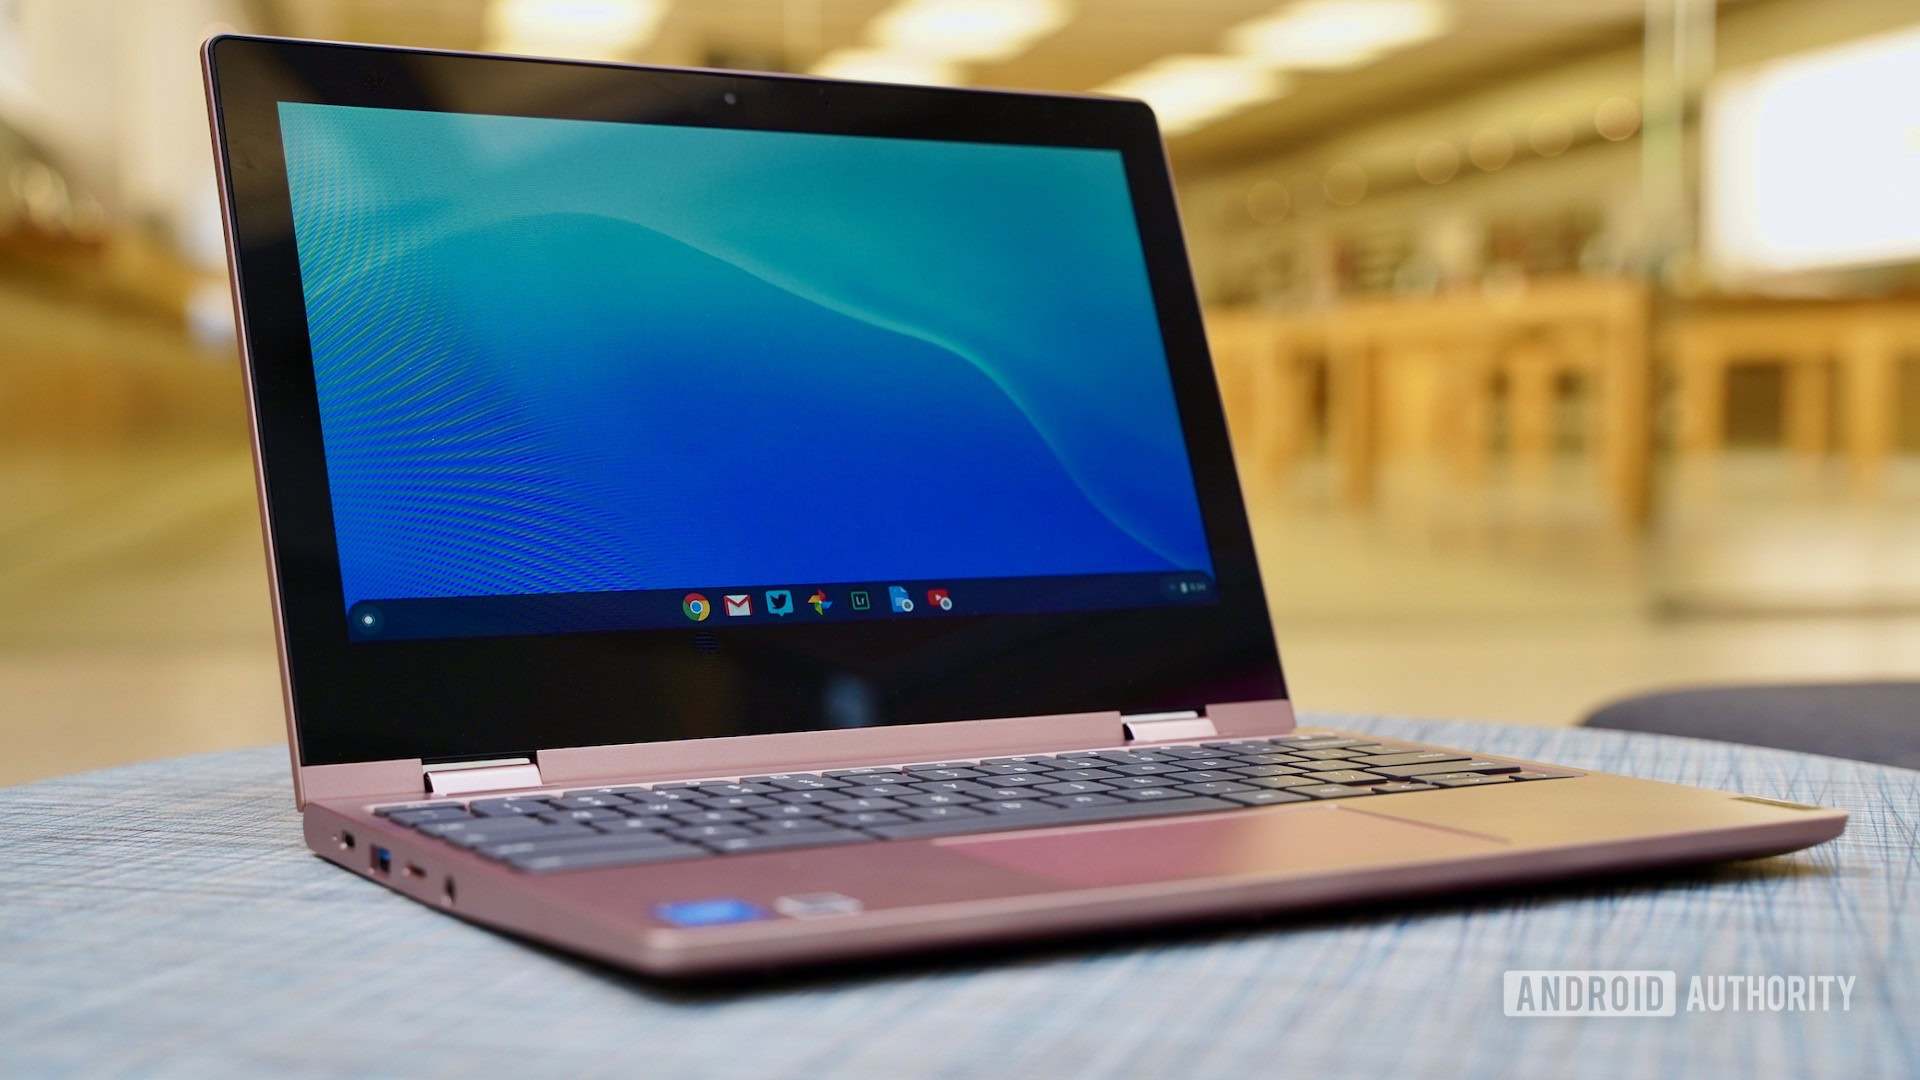 HP Chromebook 11 Review: A Well-Rounded Laptop Suited for Study